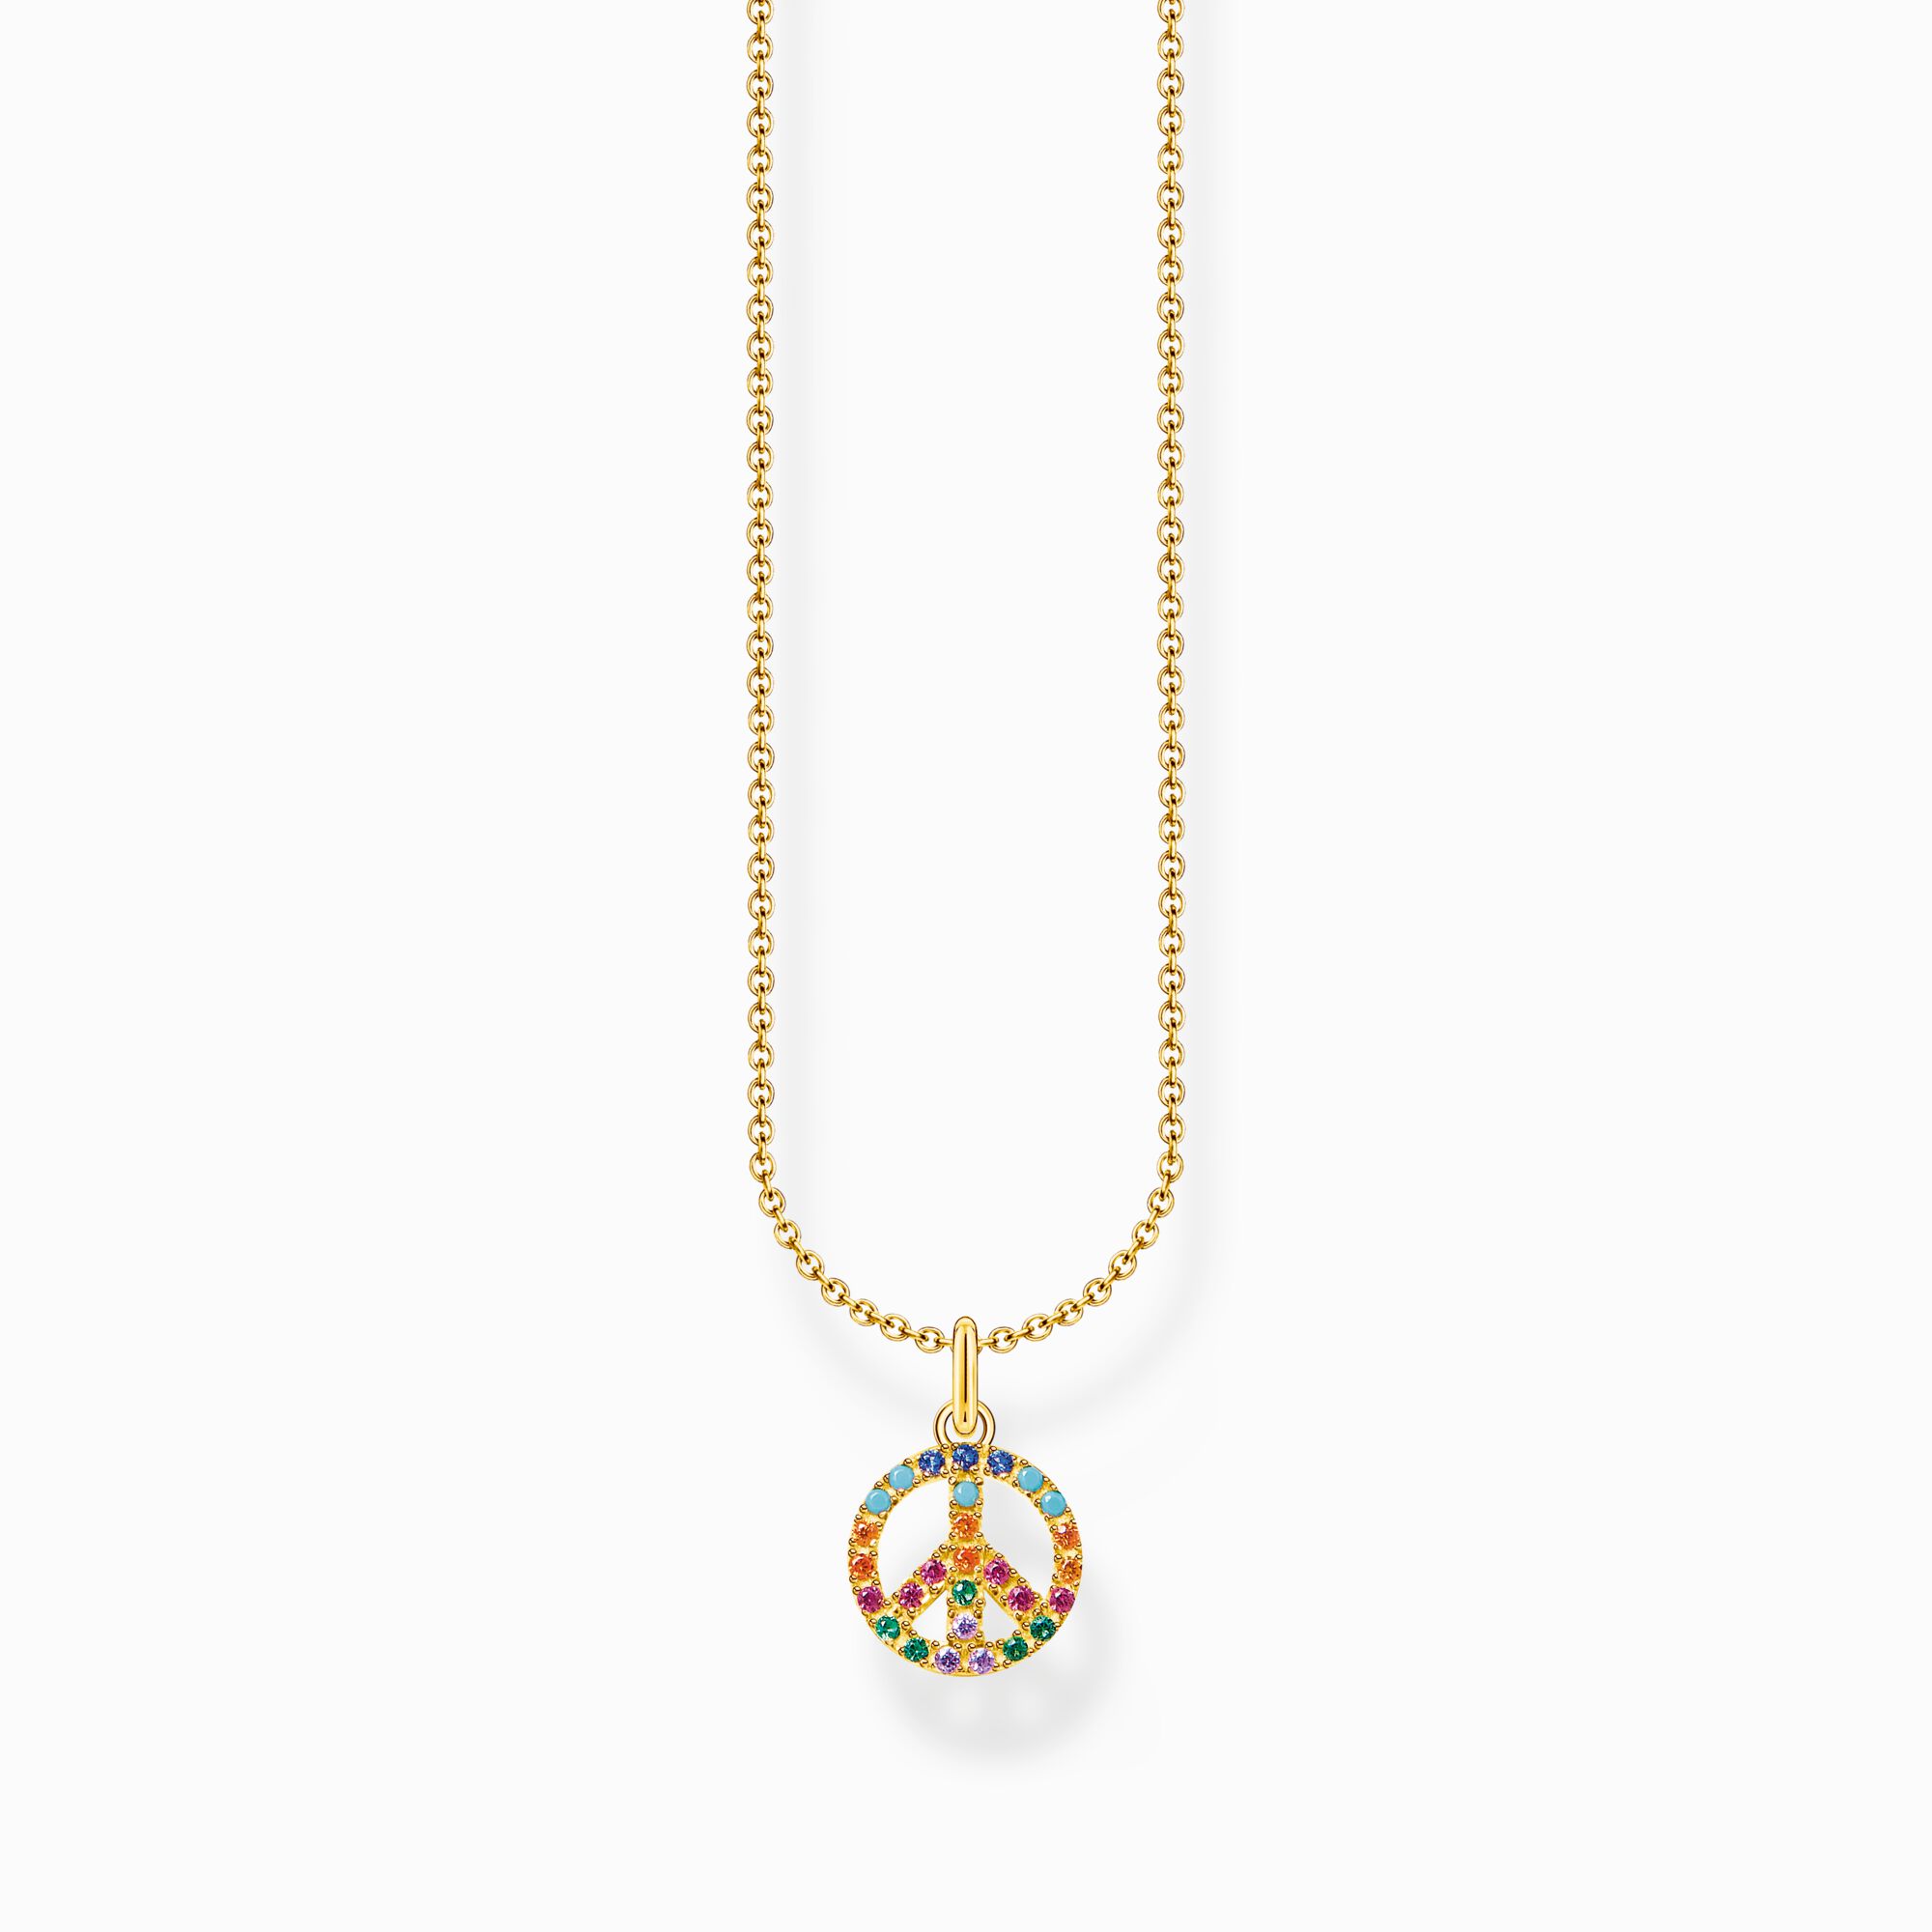 Necklace peace with colourful stones gold from the Charming Collection collection in the THOMAS SABO online store